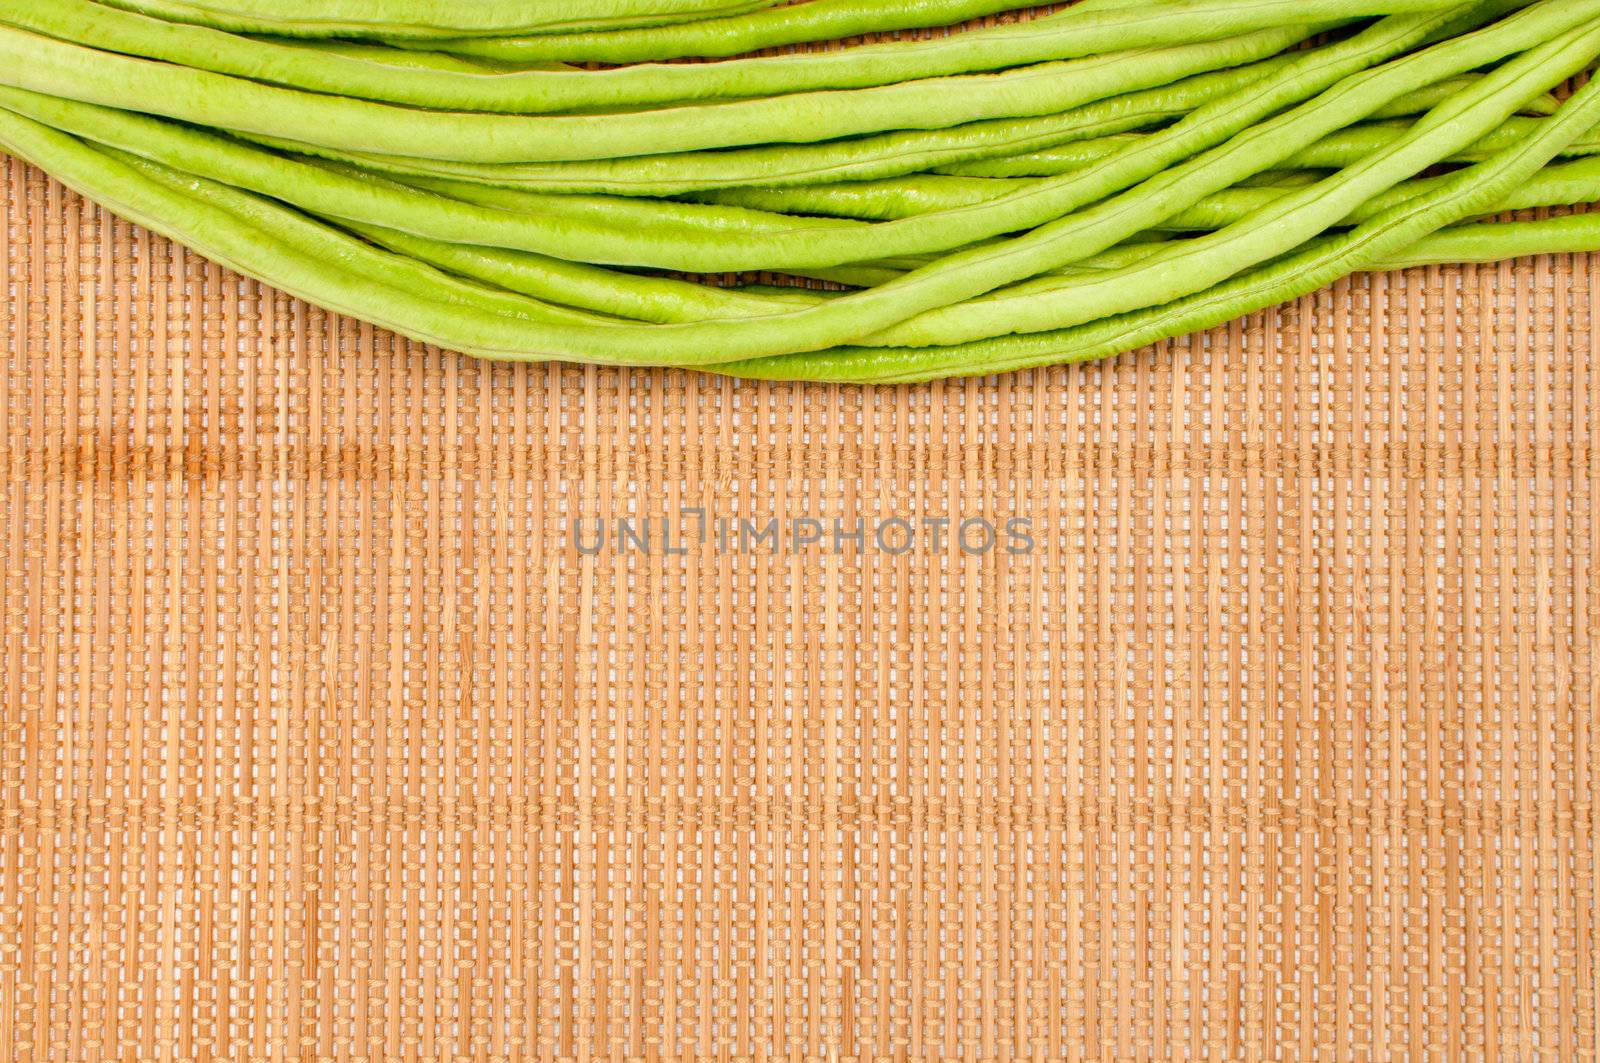 abstract design background vegetables on a bamboo mat background